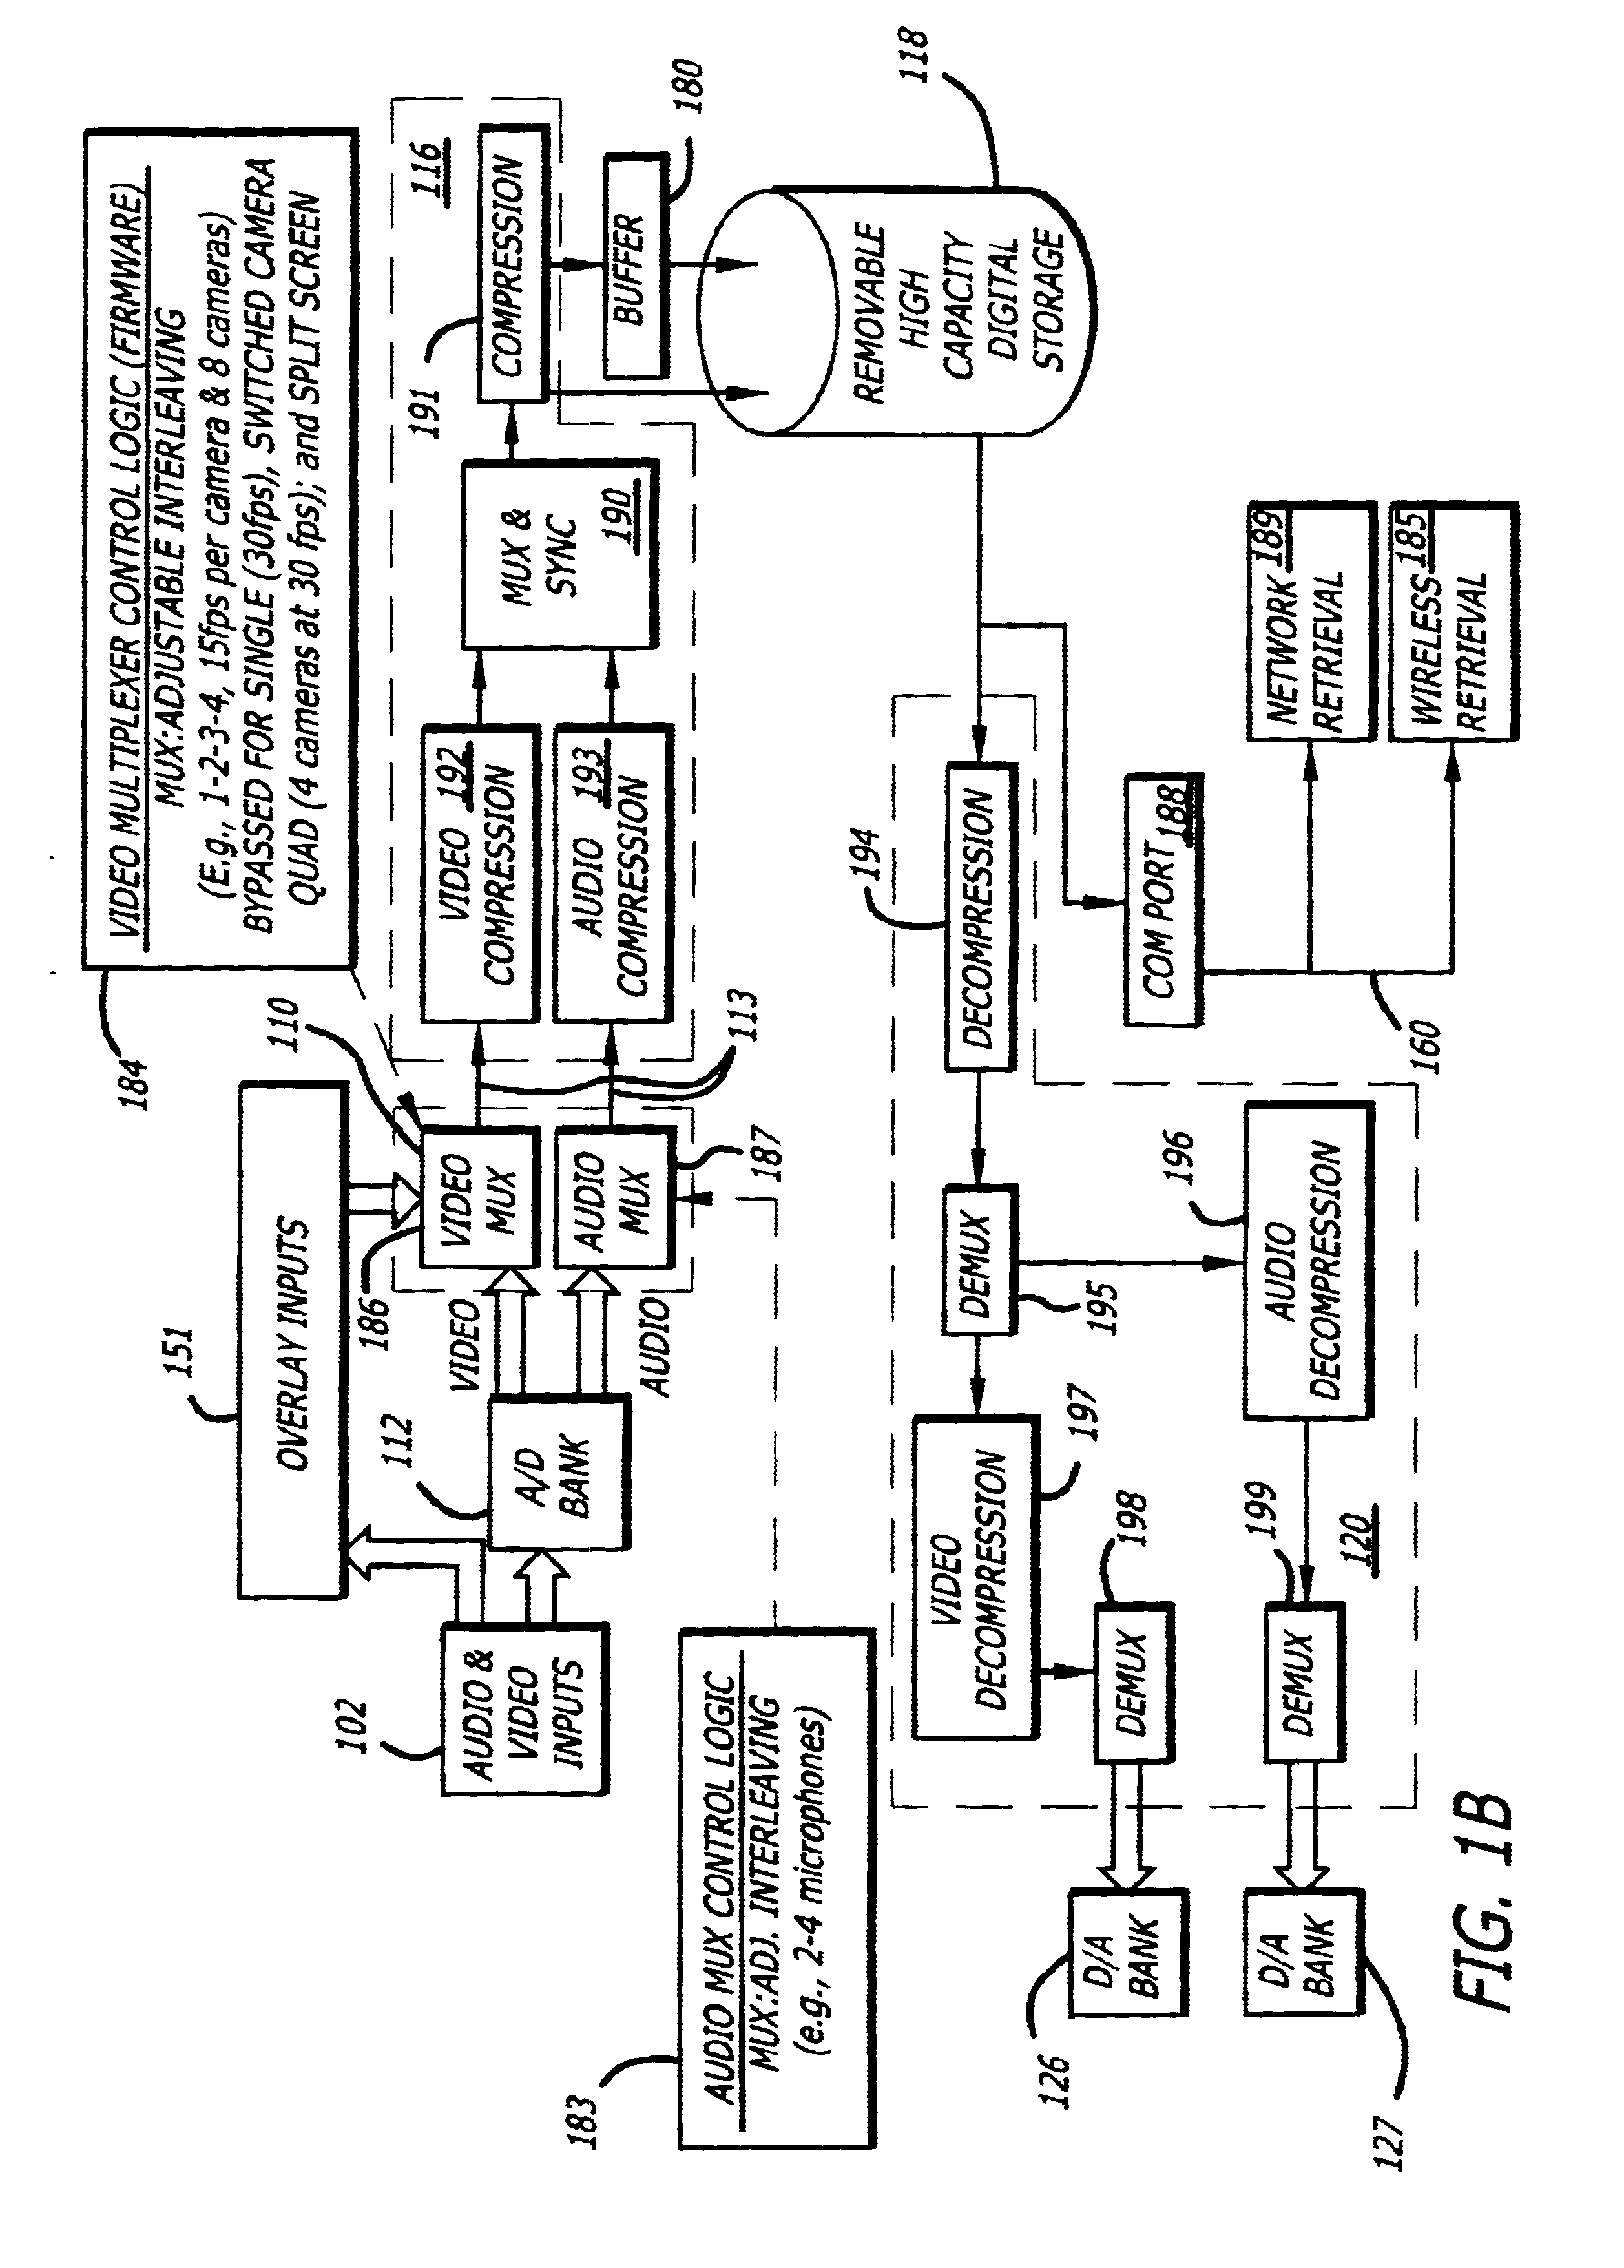 Sensing vehicle battery charging and/or engine block heating to trigger pre-heating of a mobile electronic device